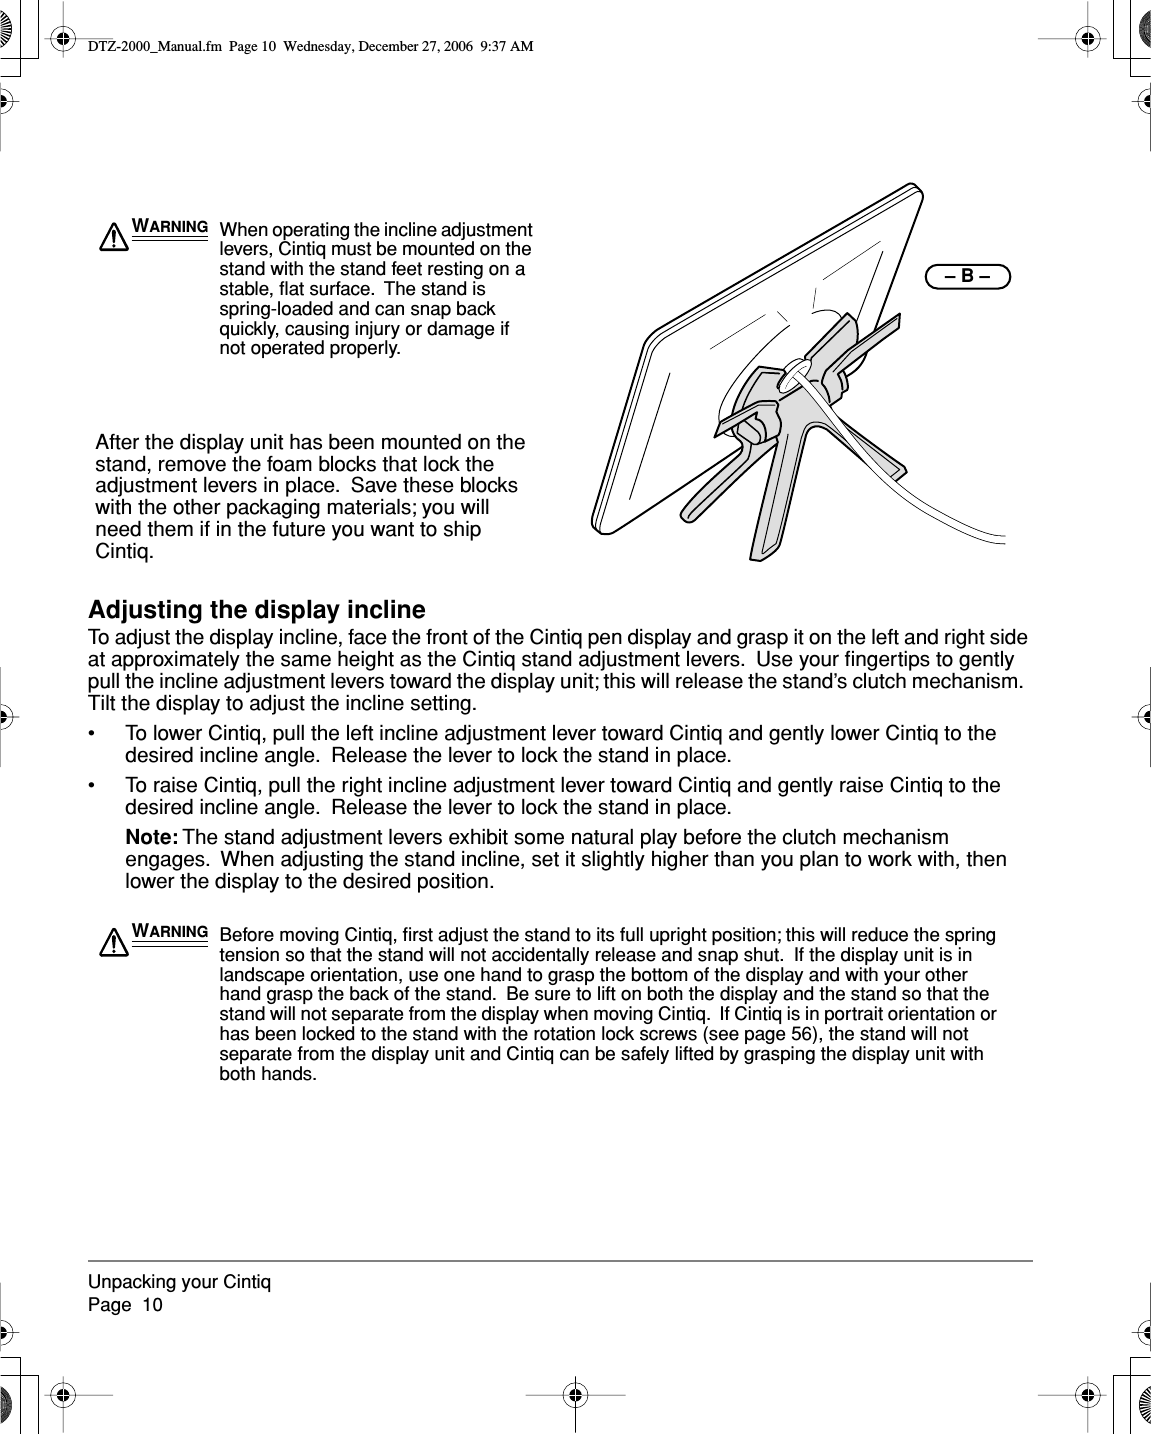  Unpacking your CintiqPage  10 Adjusting the display incline To adjust the display incline, face the front of the Cintiq pen display and grasp it on the left and right side at approximately the same height as the Cintiq stand adjustment levers.  Use your ﬁngertips to gently pull the incline adjustment levers toward the display unit; this will release the stand’s clutch mechanism.  Tilt the display to adjust the incline setting.• To lower Cintiq, pull the left incline adjustment lever toward Cintiq and gently lower Cintiq to the desired incline angle.  Release the lever to lock the stand in place.• To raise Cintiq, pull the right incline adjustment lever toward Cintiq and gently raise Cintiq to the desired incline angle.  Release the lever to lock the stand in place. Note:  The stand adjustment levers exhibit some natural play before the clutch mechanism engages.  When adjusting the stand incline, set it slightly higher than you plan to work with, then lower the display to the desired position.– B –WARNING When operating the incline adjustment levers, Cintiq must be mounted on the stand with the stand feet resting on a stable, ﬂat surface.  The stand is spring-loaded and can snap back quickly, causing injury or damage if not operated properly.After the display unit has been mounted on the stand, remove the foam blocks that lock the adjustment levers in place.  Save these blocks with the other packaging materials; you will need them if in the future you want to ship Cintiq.WARNING Before moving Cintiq, ﬁrst adjust the stand to its full upright position; this will reduce the spring tension so that the stand will not accidentally release and snap shut.  If the display unit is in landscape orientation, use one hand to grasp the bottom of the display and with your other hand grasp the back of the stand.  Be sure to lift on both the display and the stand so that the stand will not separate from the display when moving Cintiq.  If Cintiq is in portrait orientation or has been locked to the stand with the rotation lock screws (see page 56), the stand will not separate from the display unit and Cintiq can be safely lifted by grasping the display unit with both hands. DTZ-2000_Manual.fm  Page 10  Wednesday, December 27, 2006  9:37 AM